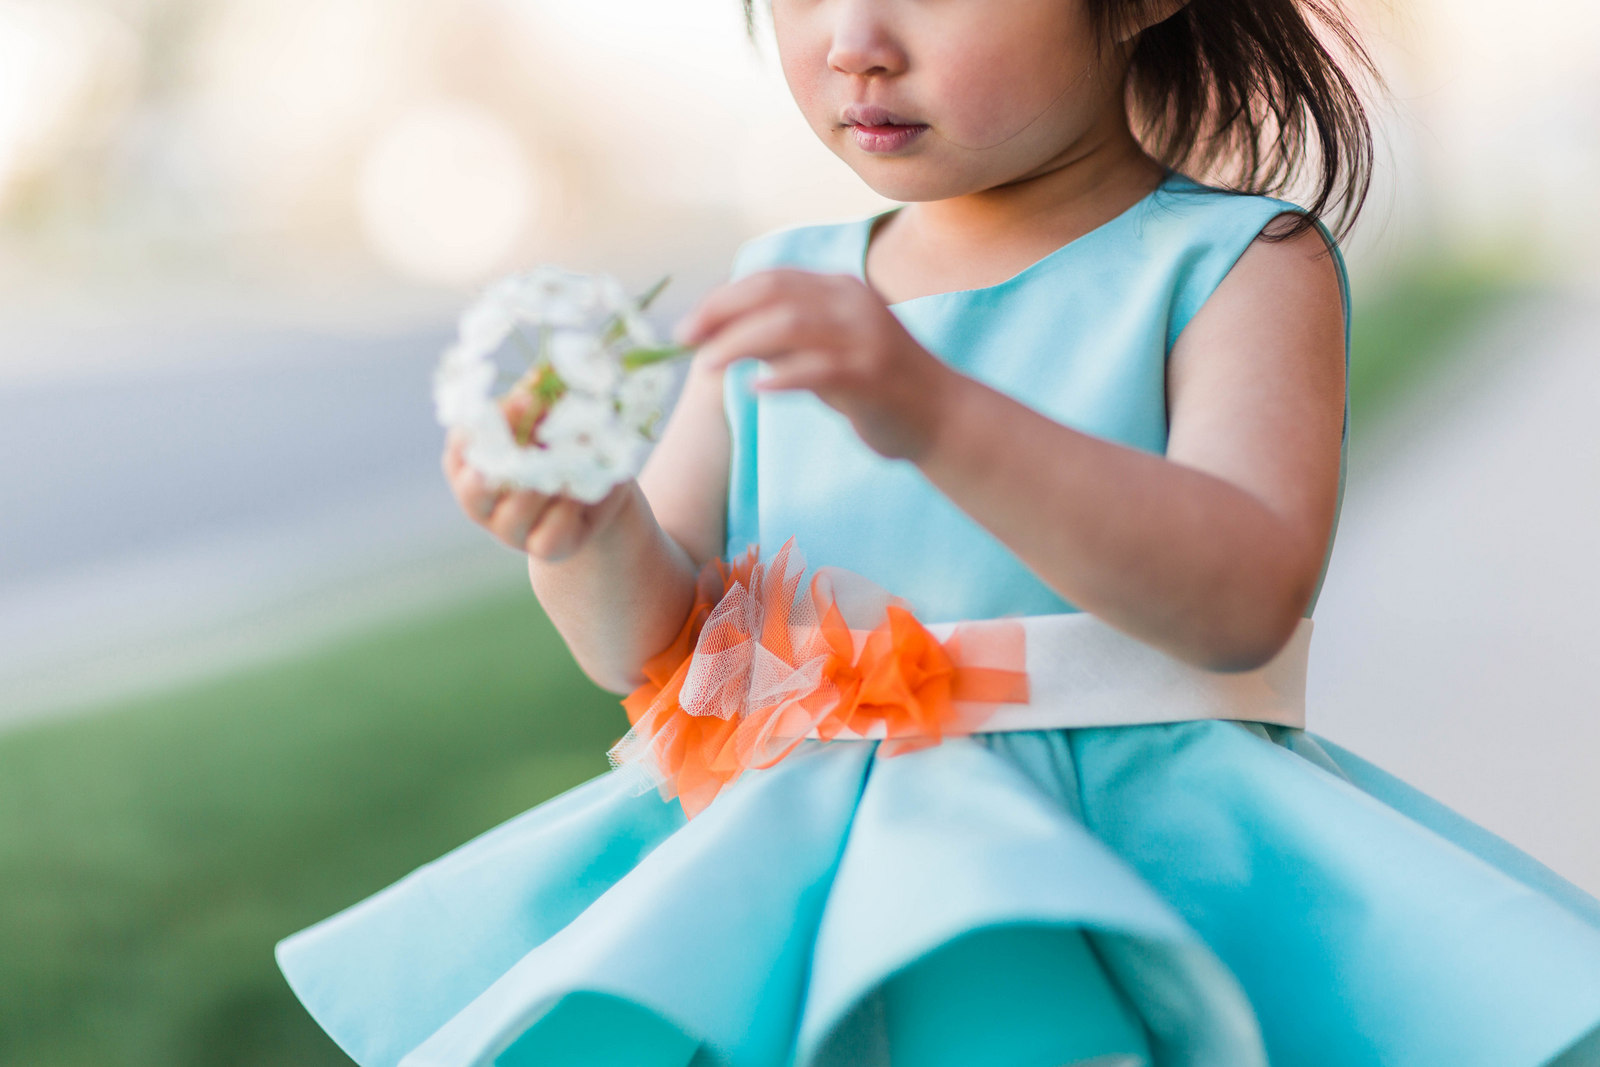 Little Miss Luk Kaylen Dress | 5 Fun Mothers Day Activities Every Mom Will Love by lifestyle blogger Sandy A La Mode